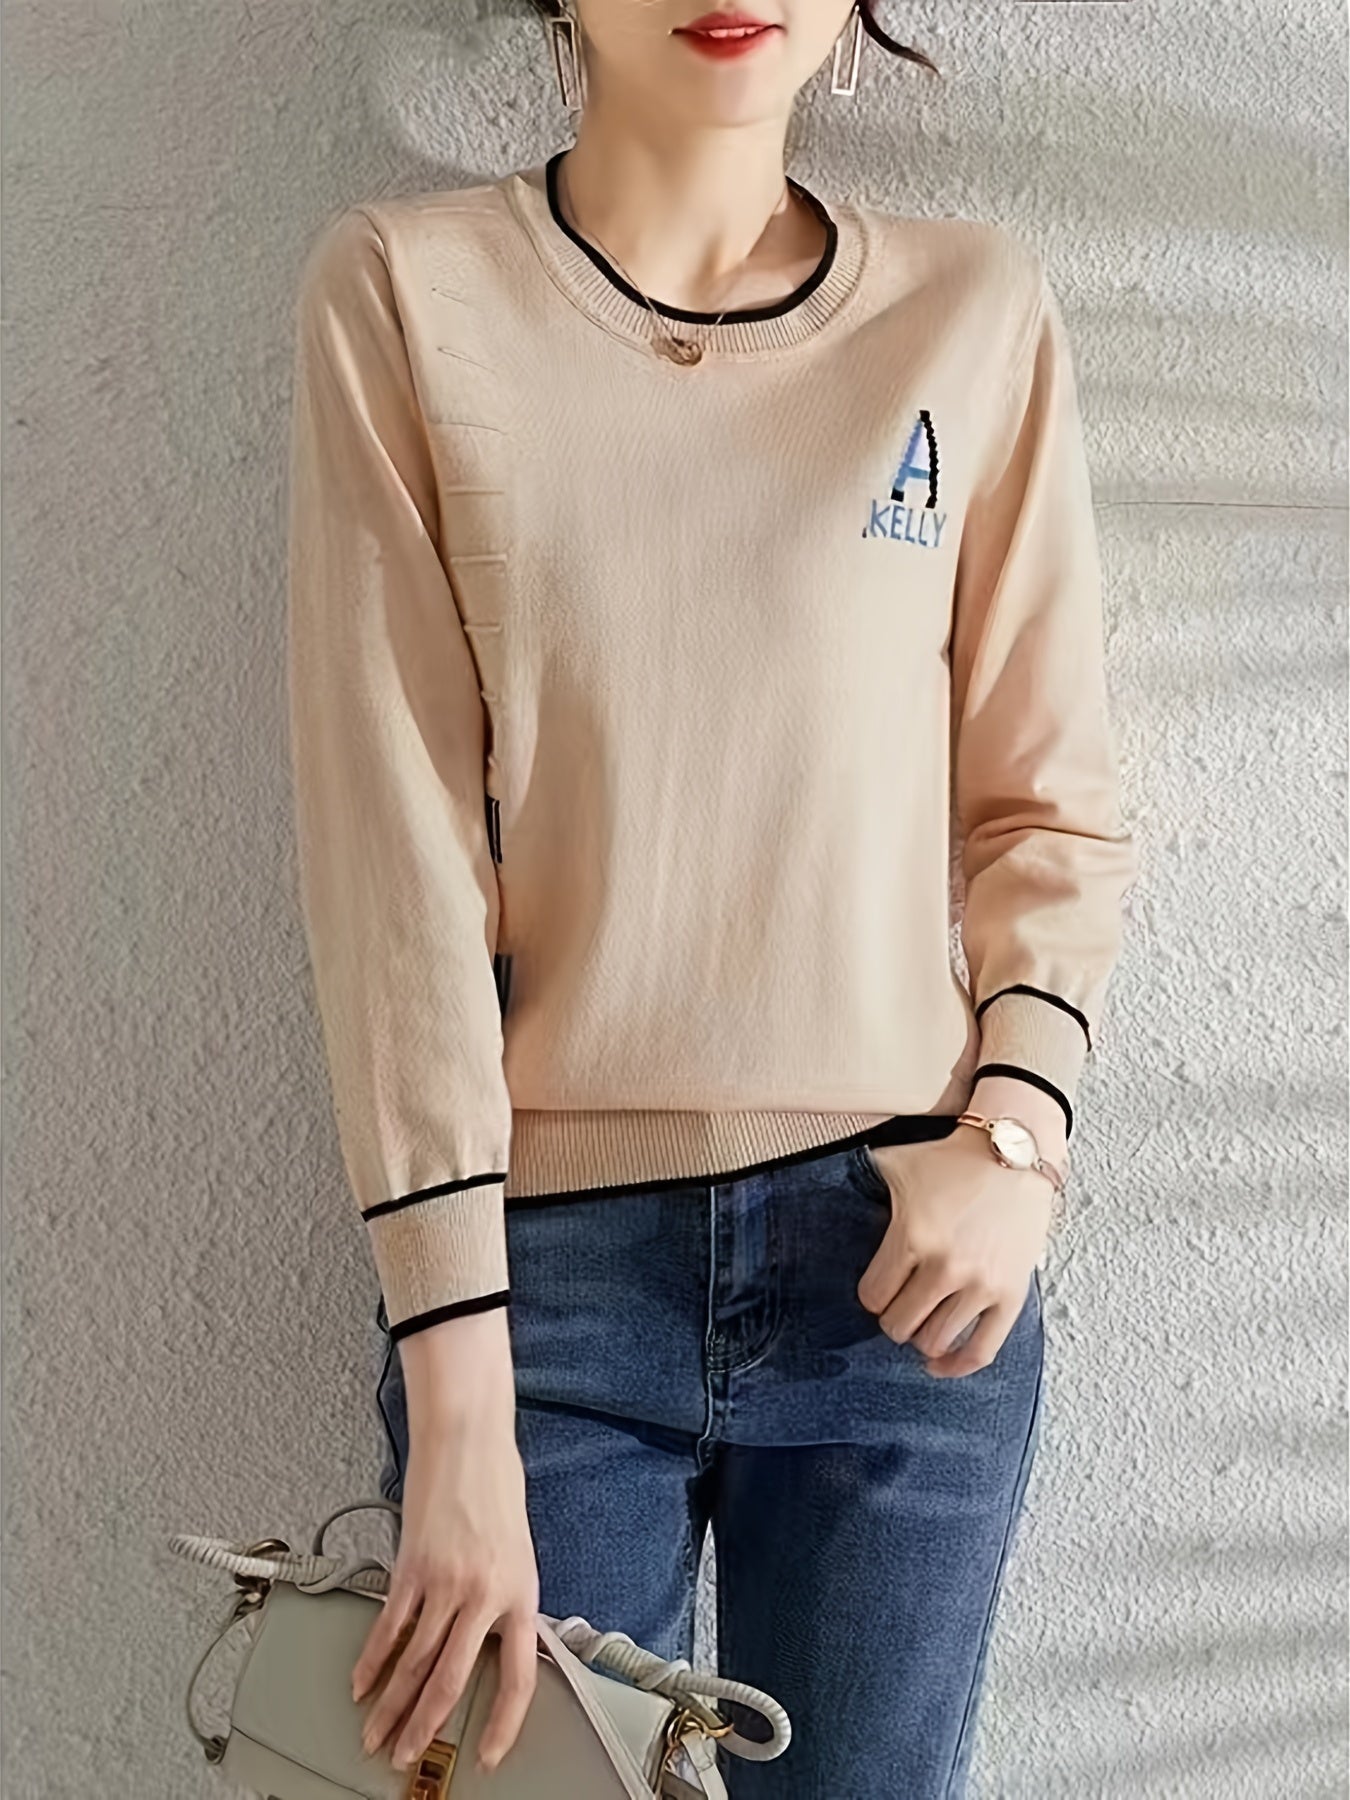 Antmvs Letter A Graphic Sweater, Long Sleeve Crew Neck Casual Sweater For Spring & Fall, Women's Clothing